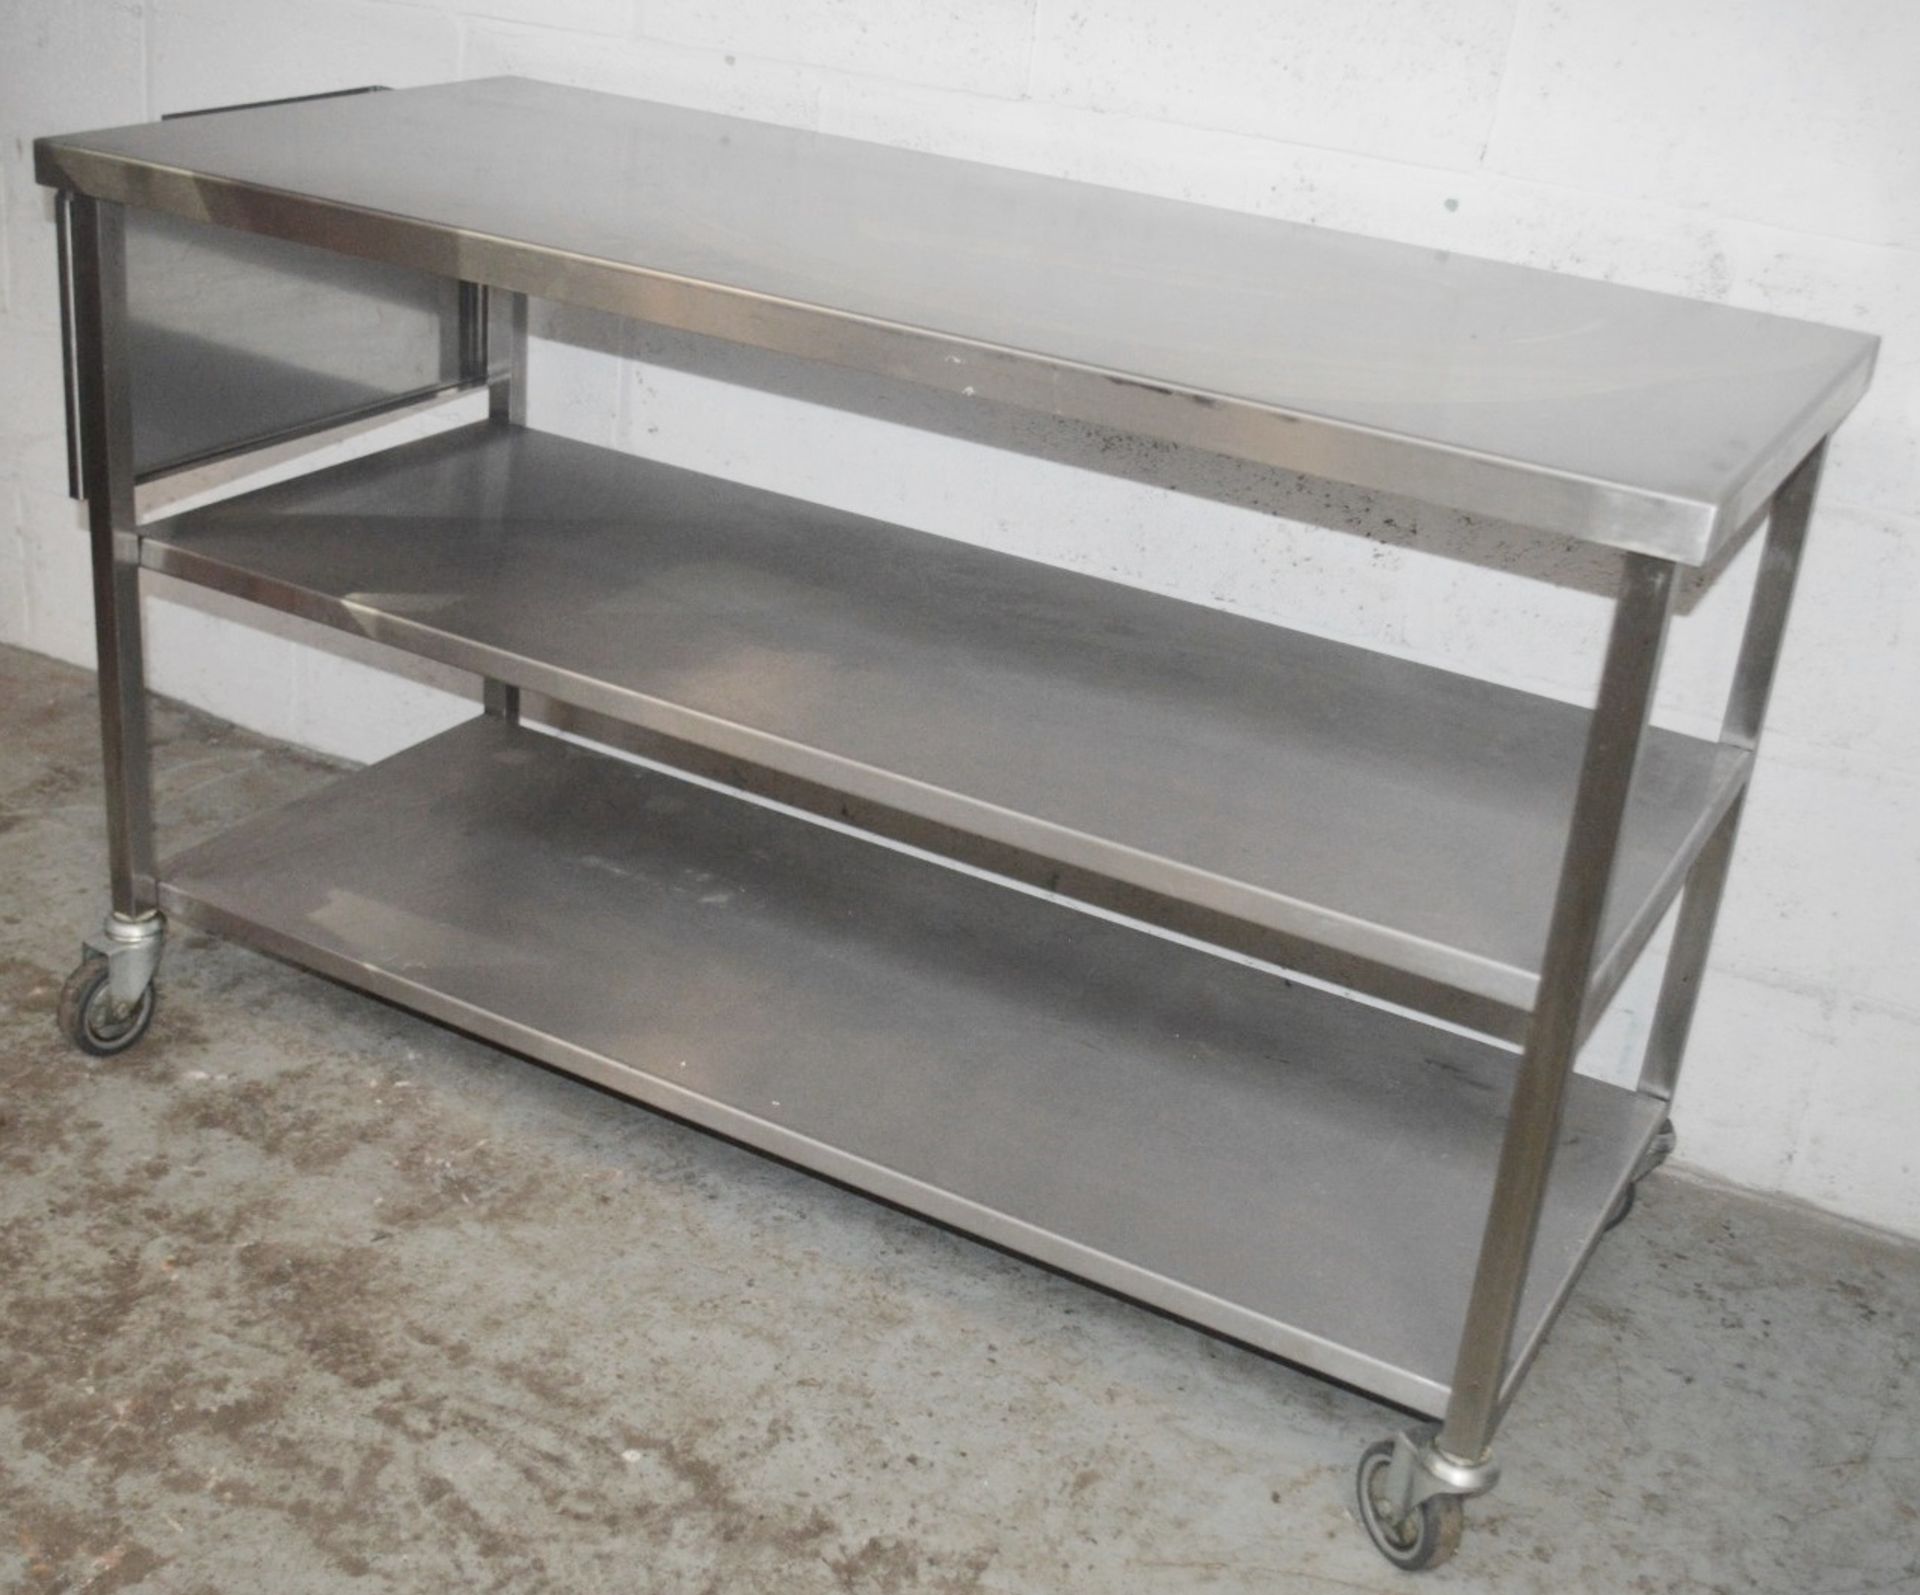 1 x Stainless Steel Commercial Kitchen Prep Trolley - Dimensions: H88 x W143 x D67cm - Very Recently - Image 3 of 4